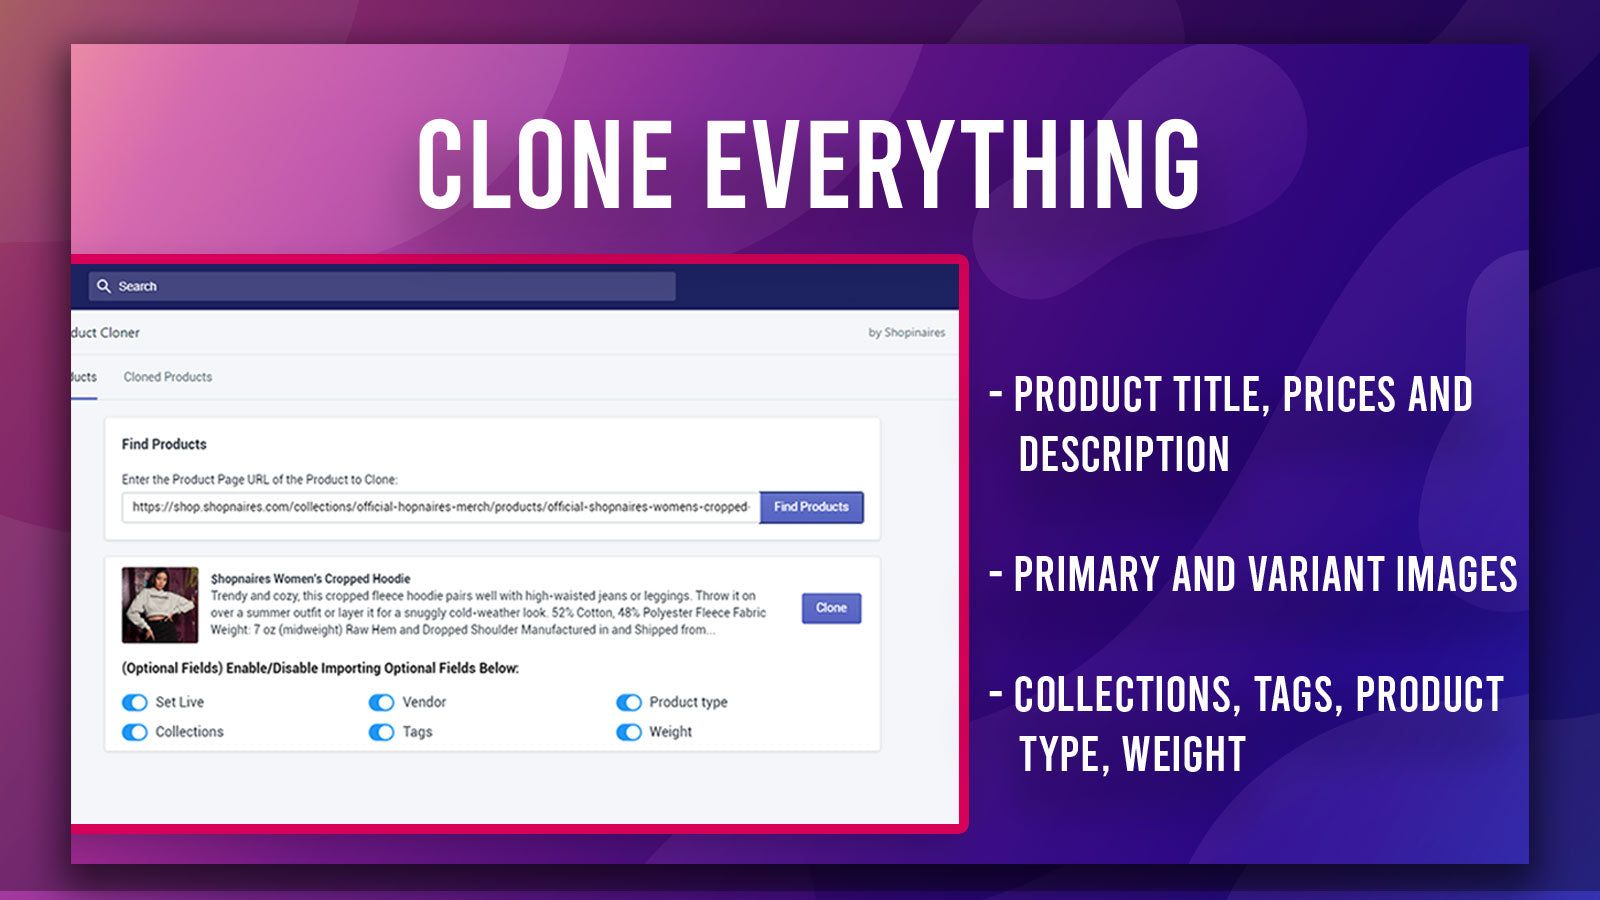 Clone everything including Product Title, Pricing & Description